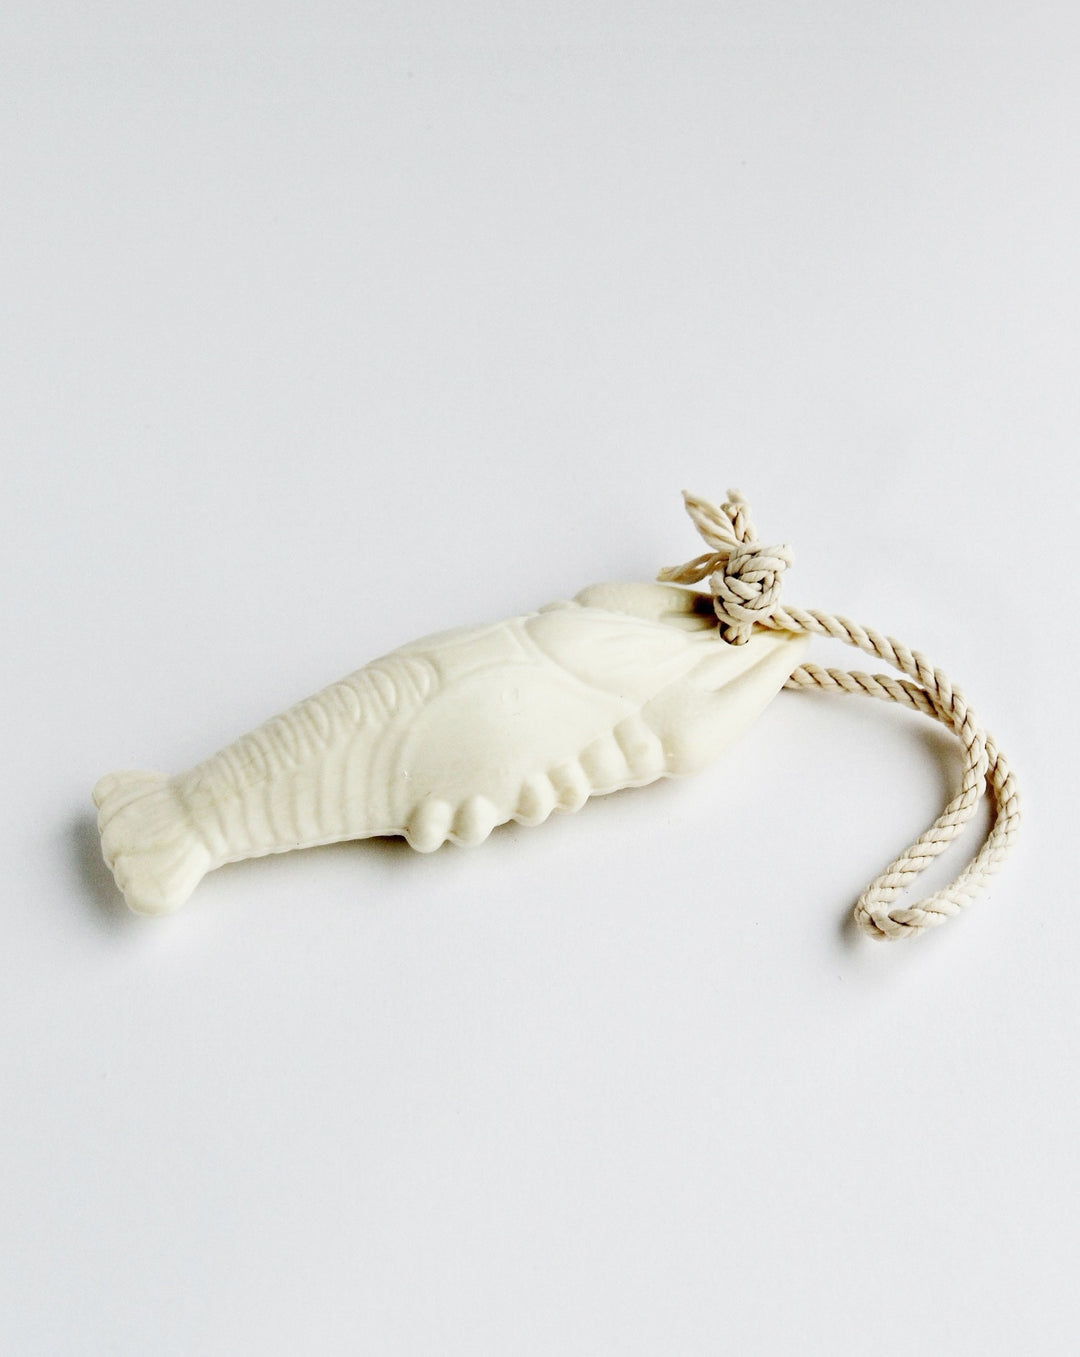 Lobster Soap on a Rope